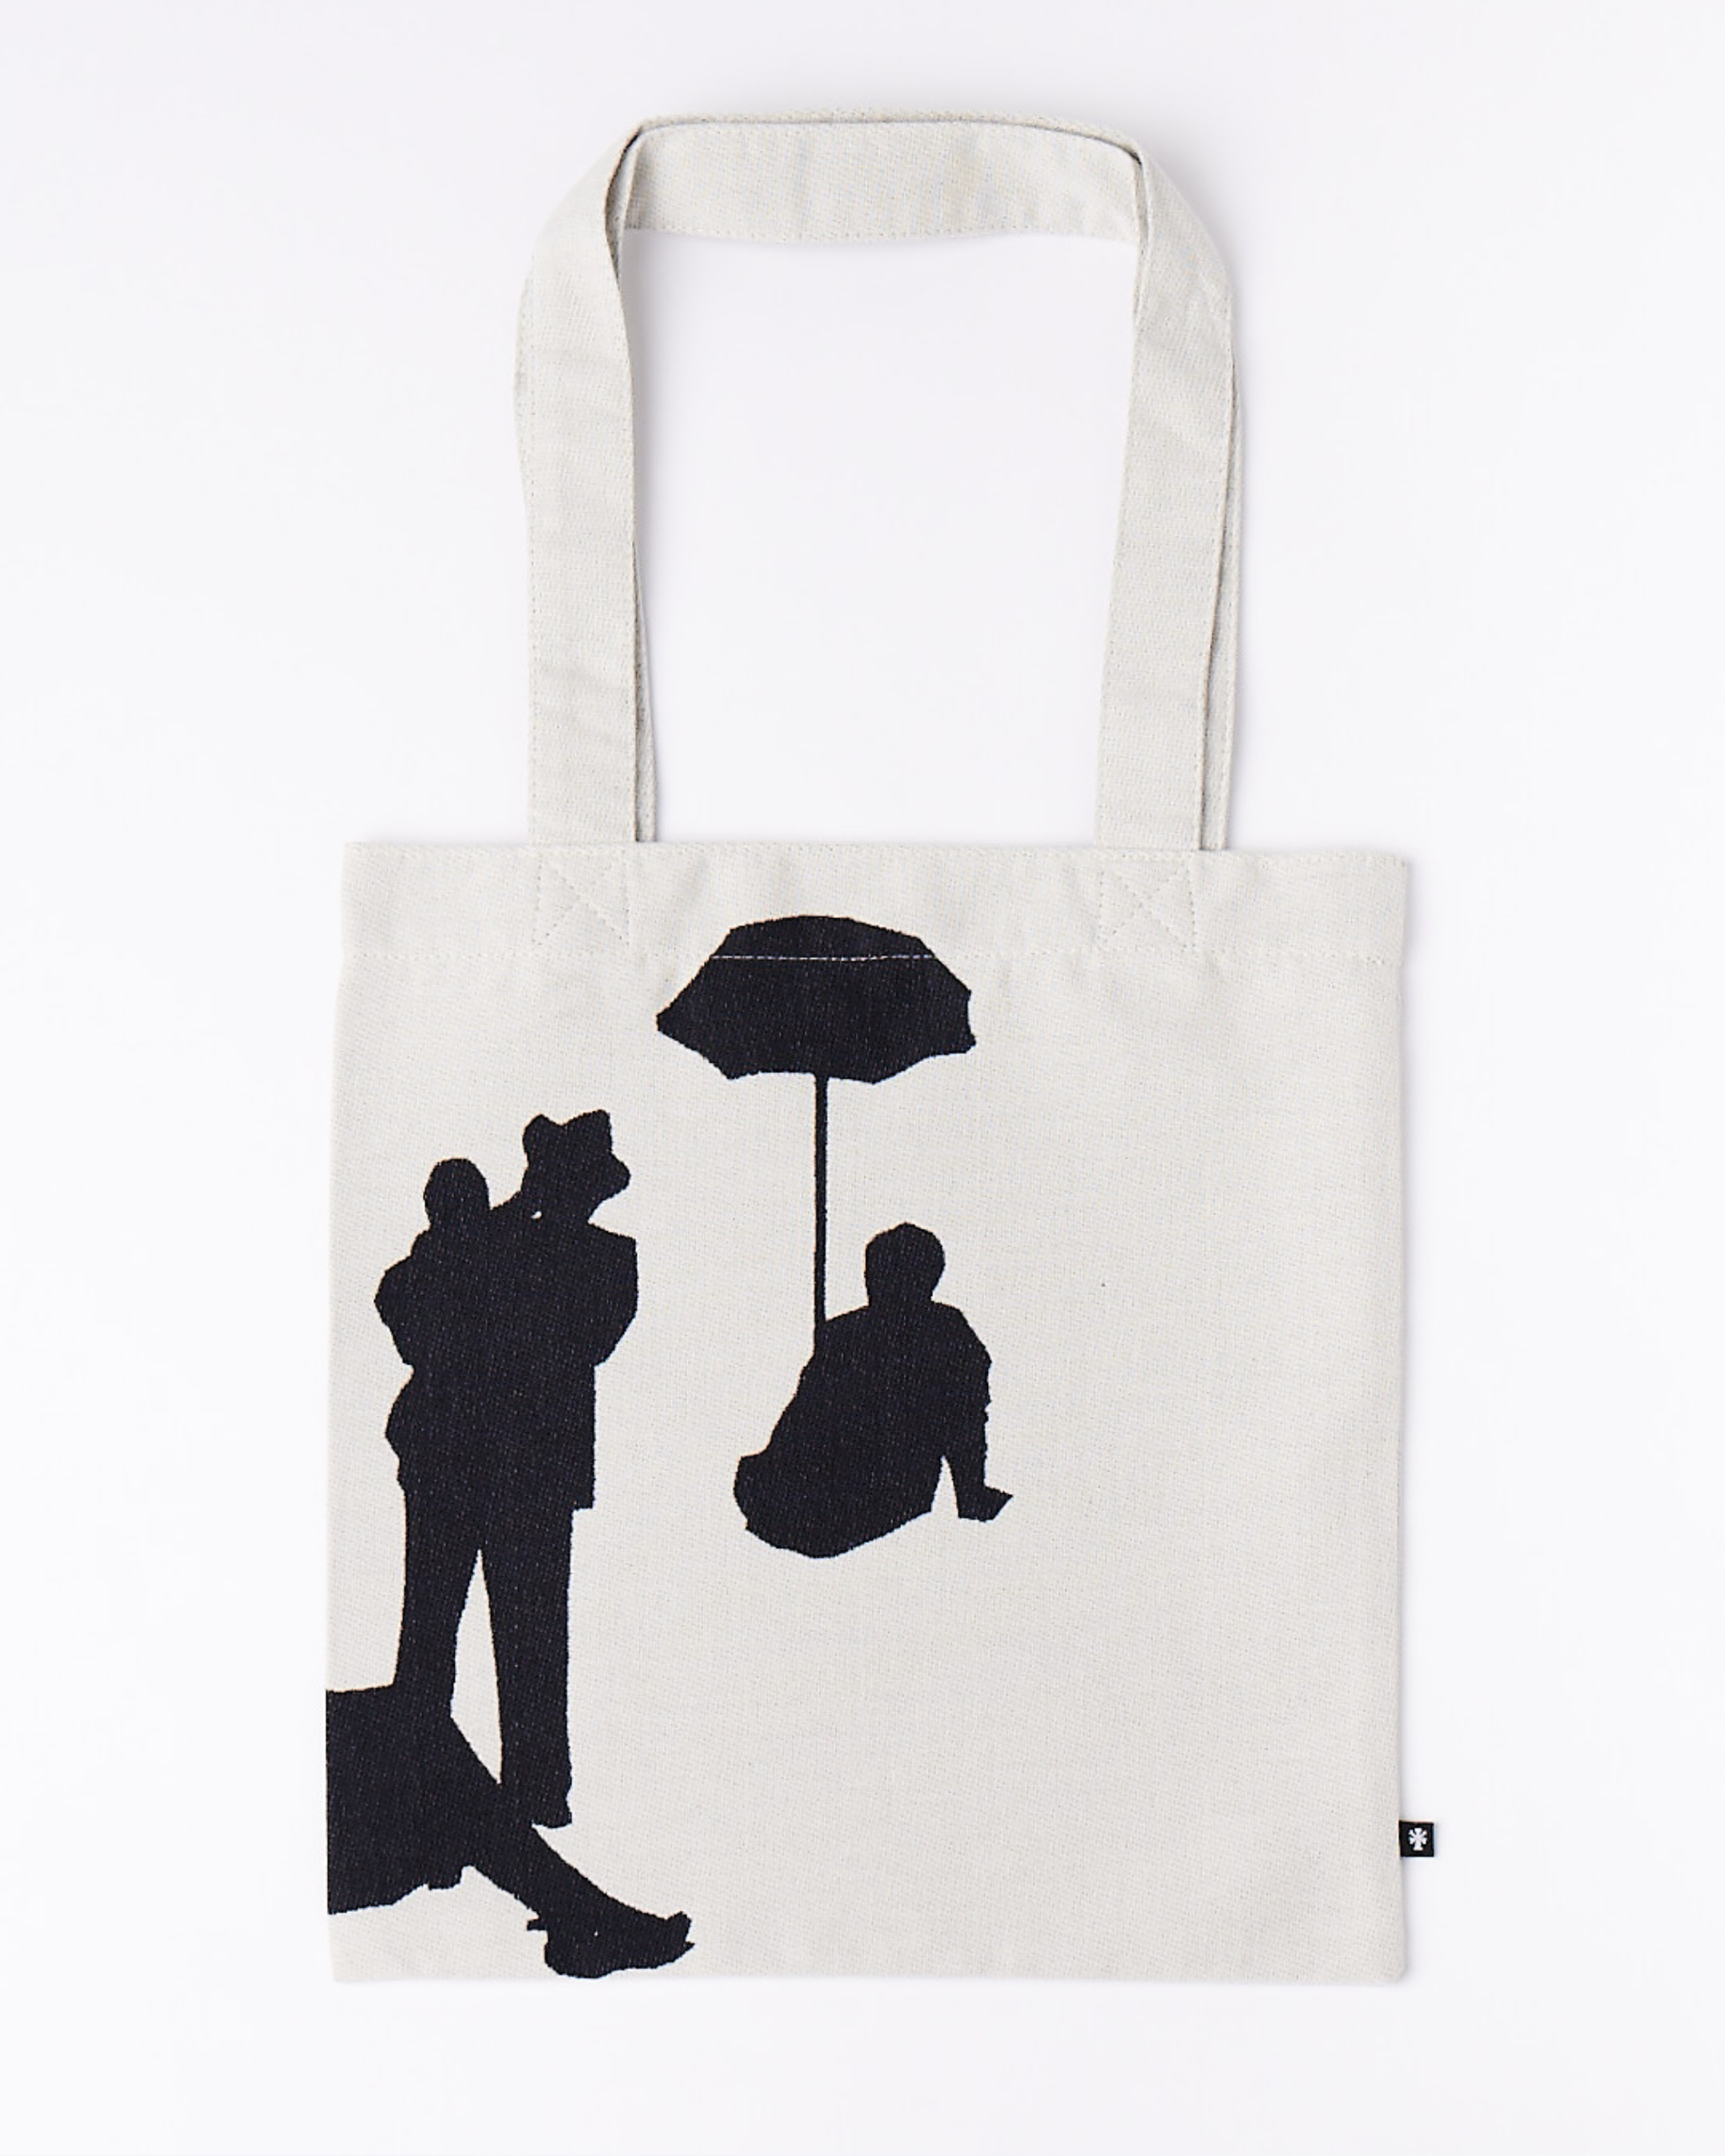 The Cotton Tote Bag Featuring Lebohang Kganye